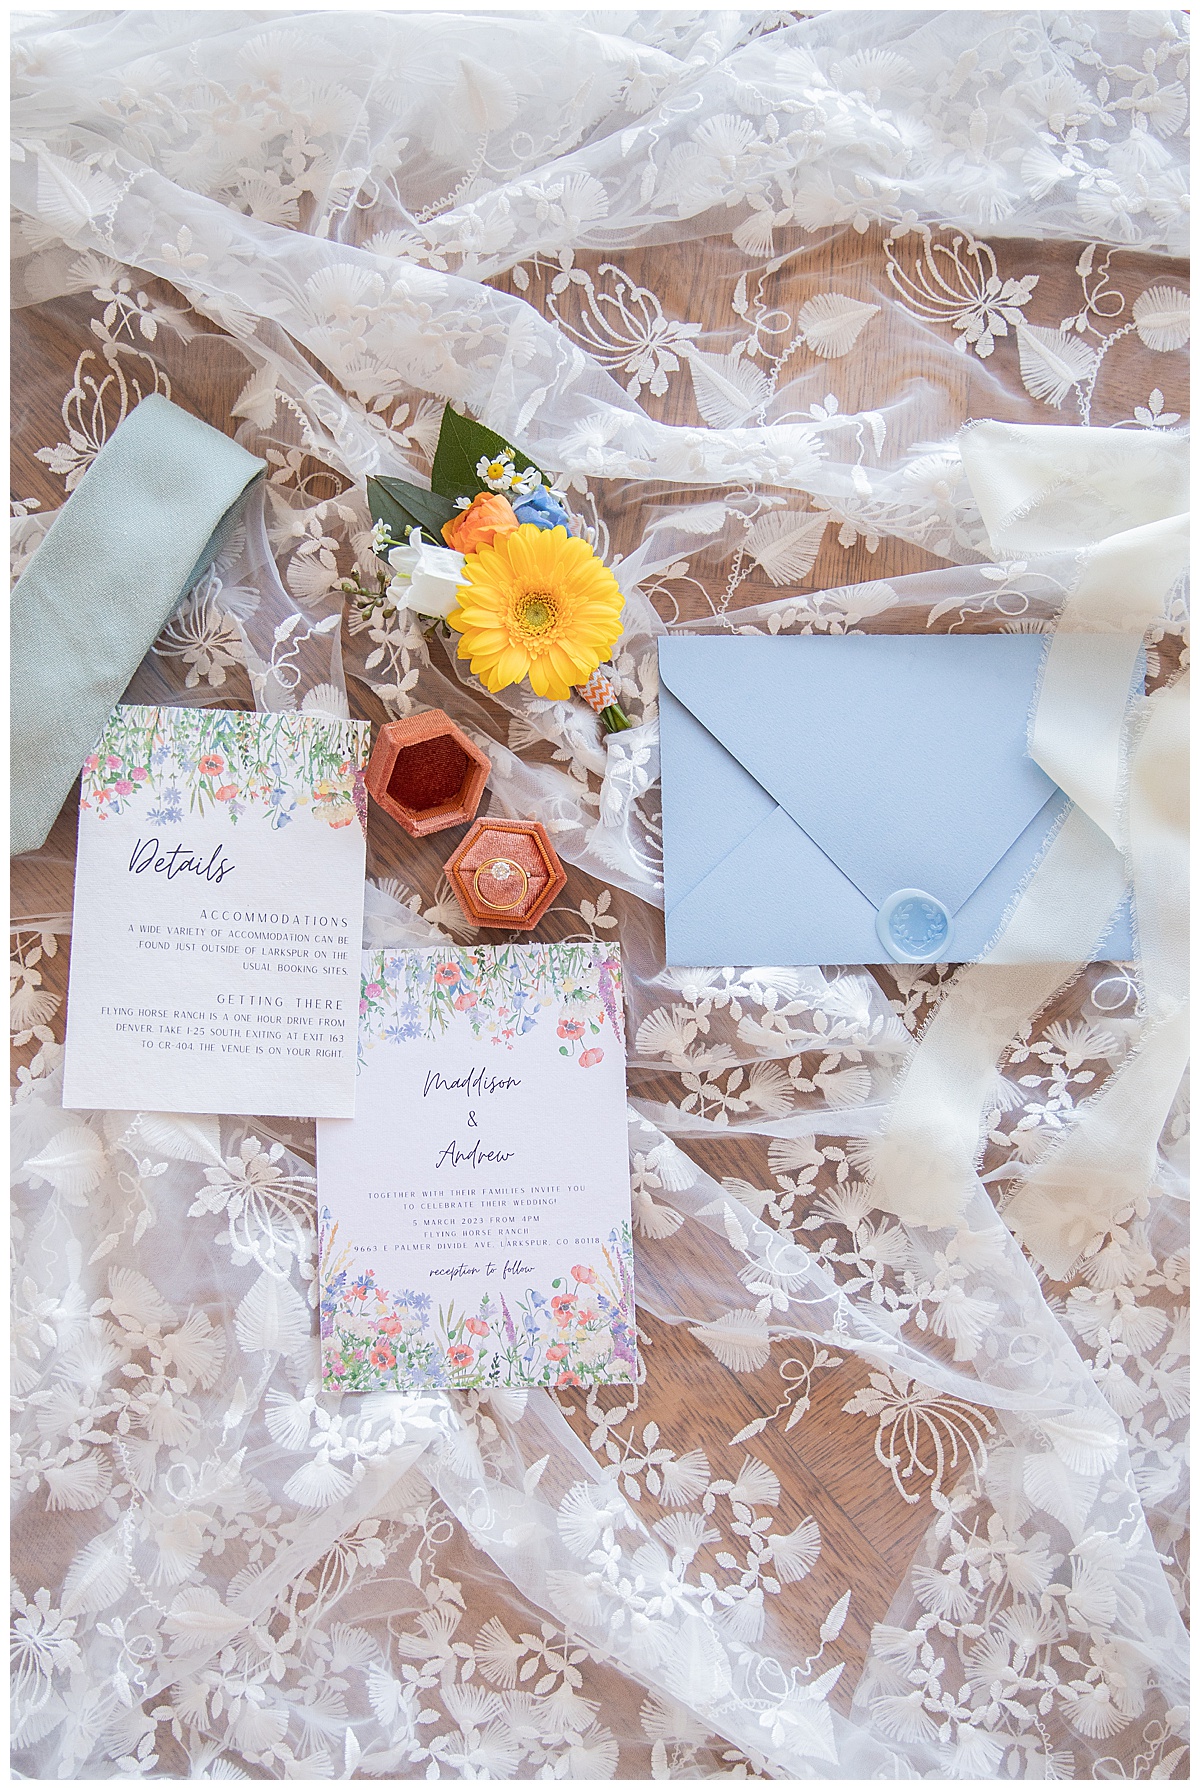 An invitation suite with wildflowers, blue, and yellow colors perfectly compliments this spring wedding inspiration shoot.